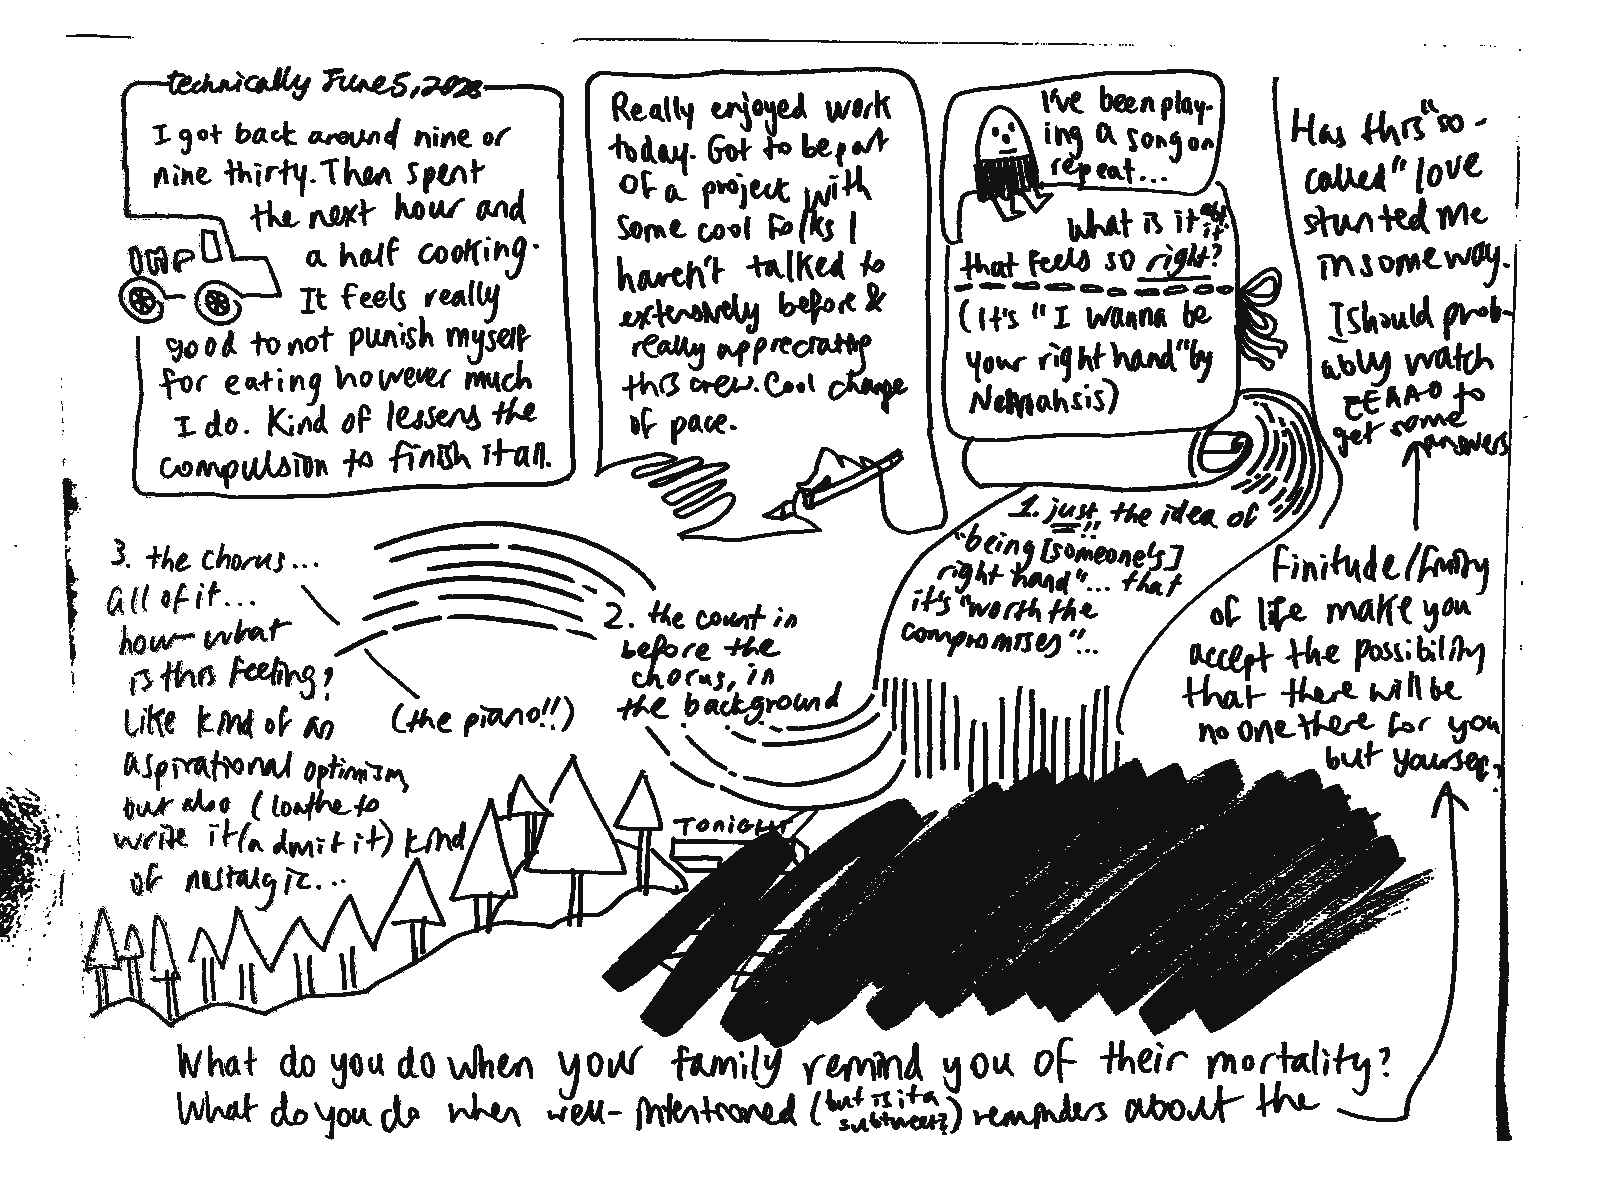 a diary entry composed of doodles and scattered thoughts, in black pen. the bottom portion of the diary entry is scribbled out in black sharpie.